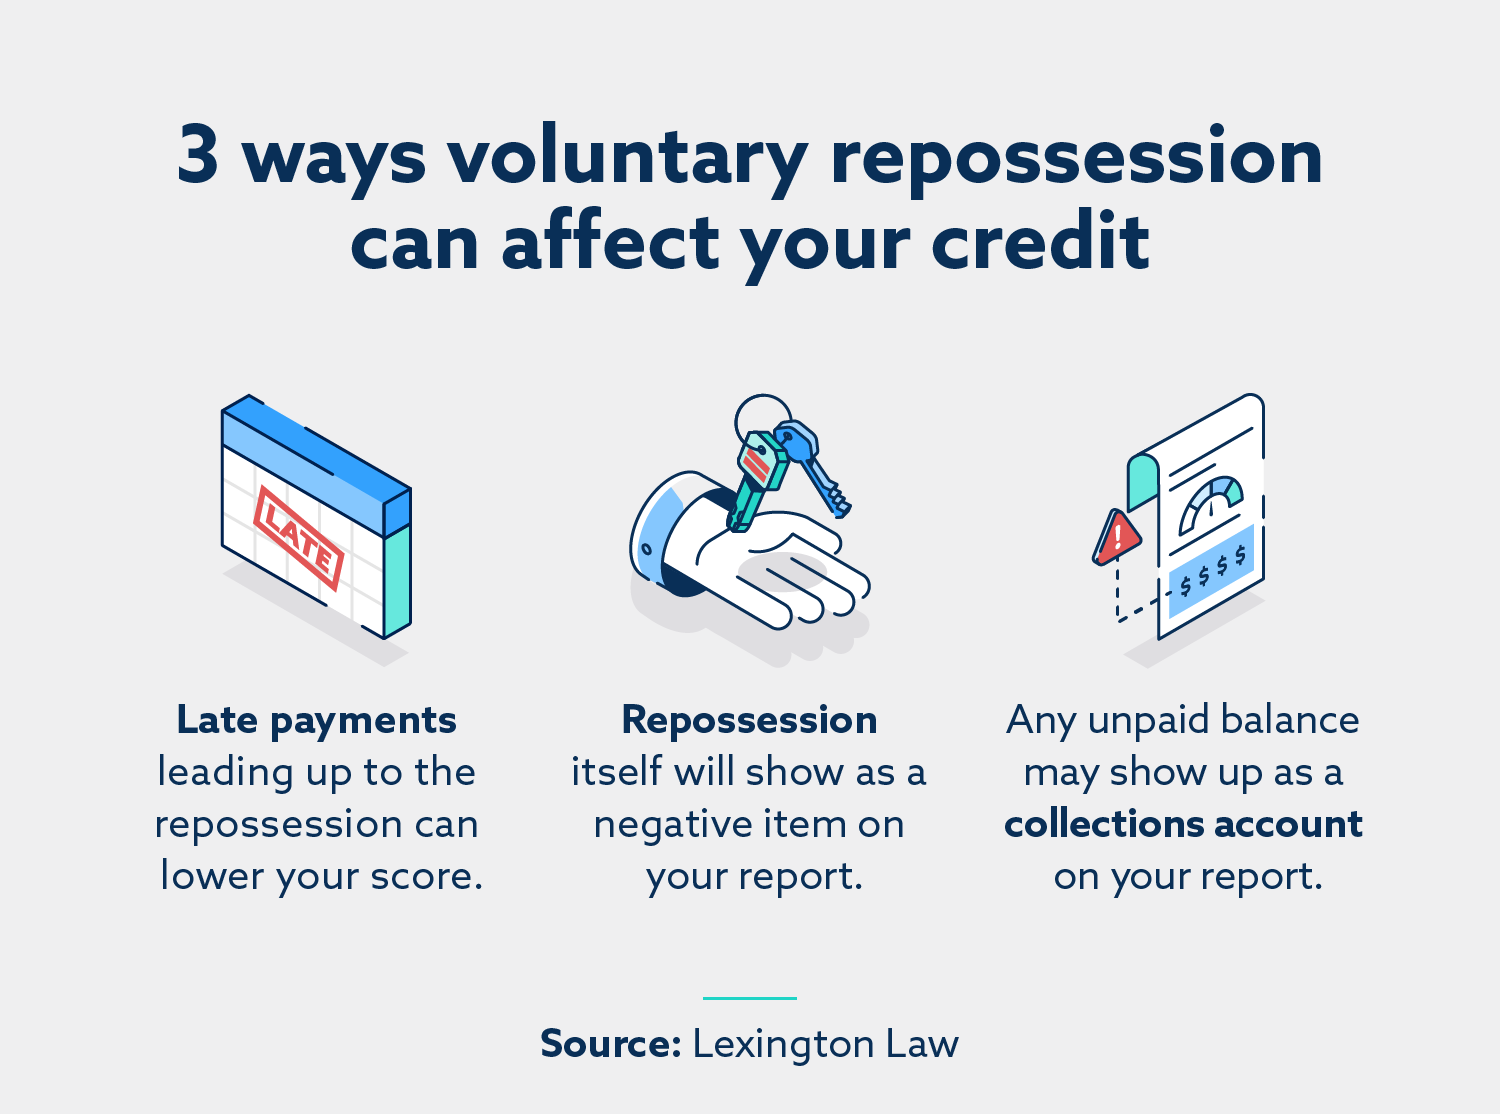 Three ways voluntary repossession can affect your credit.